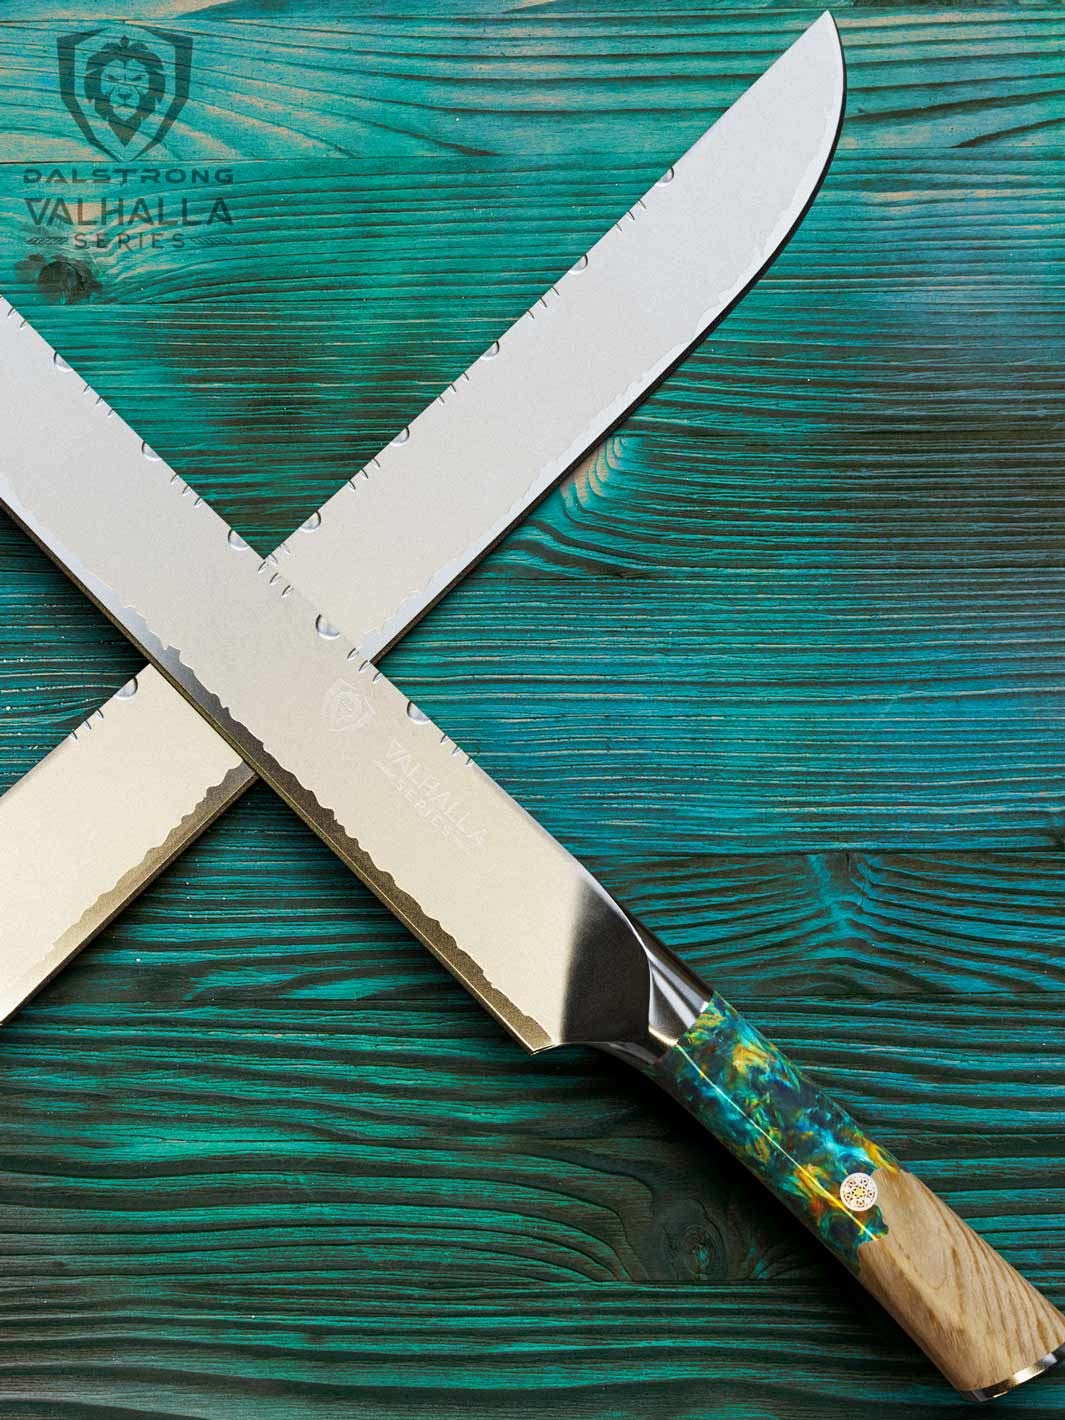 Dalstrong valhalla series 12 inch slicer knife with wooden handle on top of a wooden table.